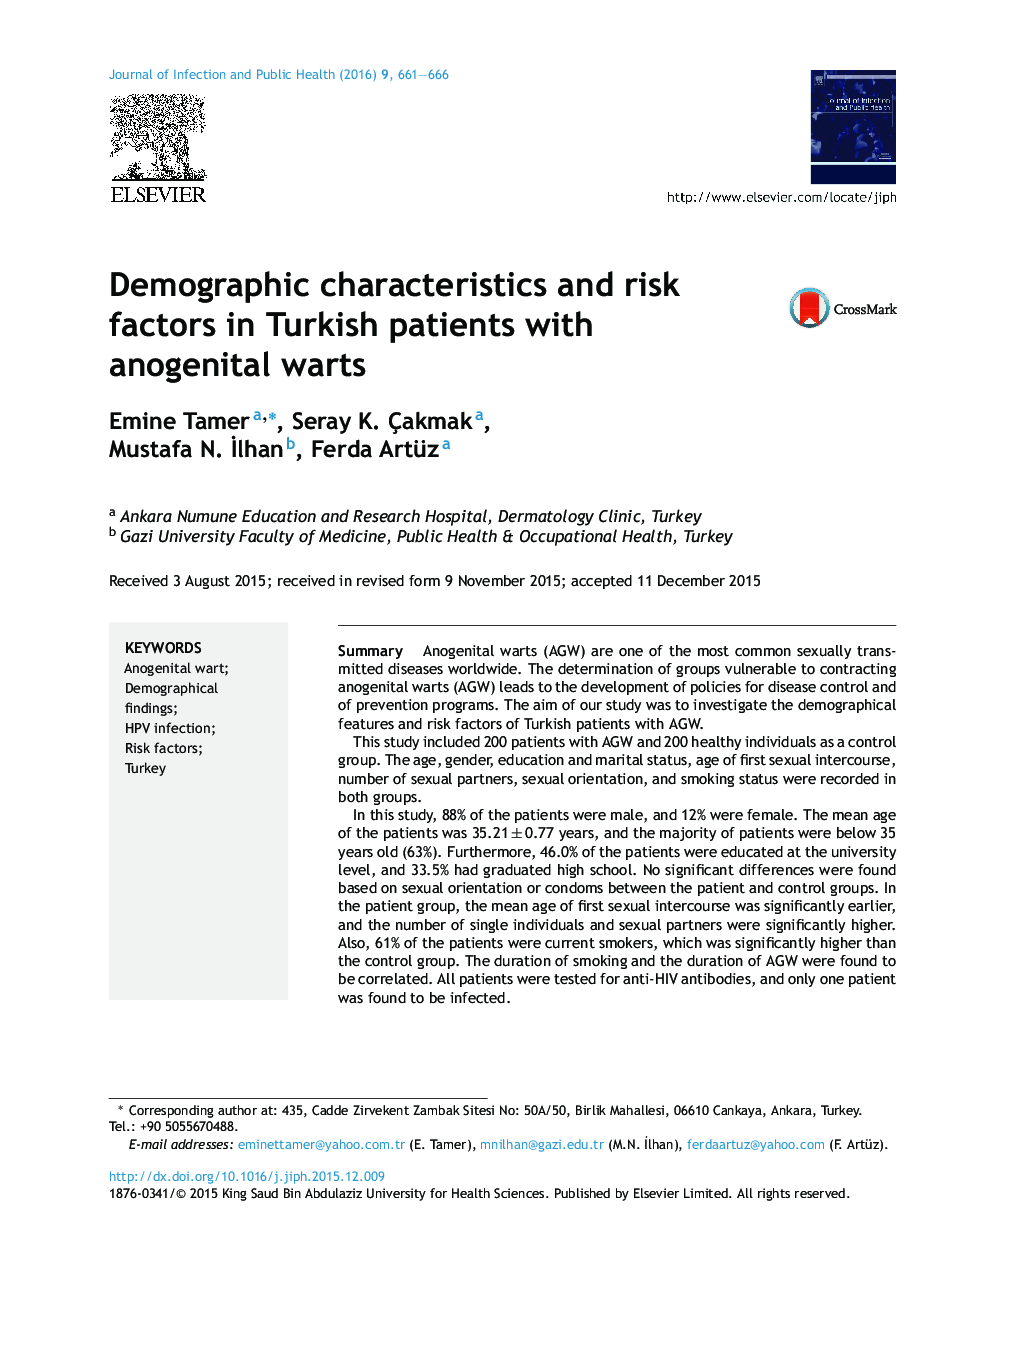 Demographic characteristics and risk factors in Turkish patients with anogenital warts